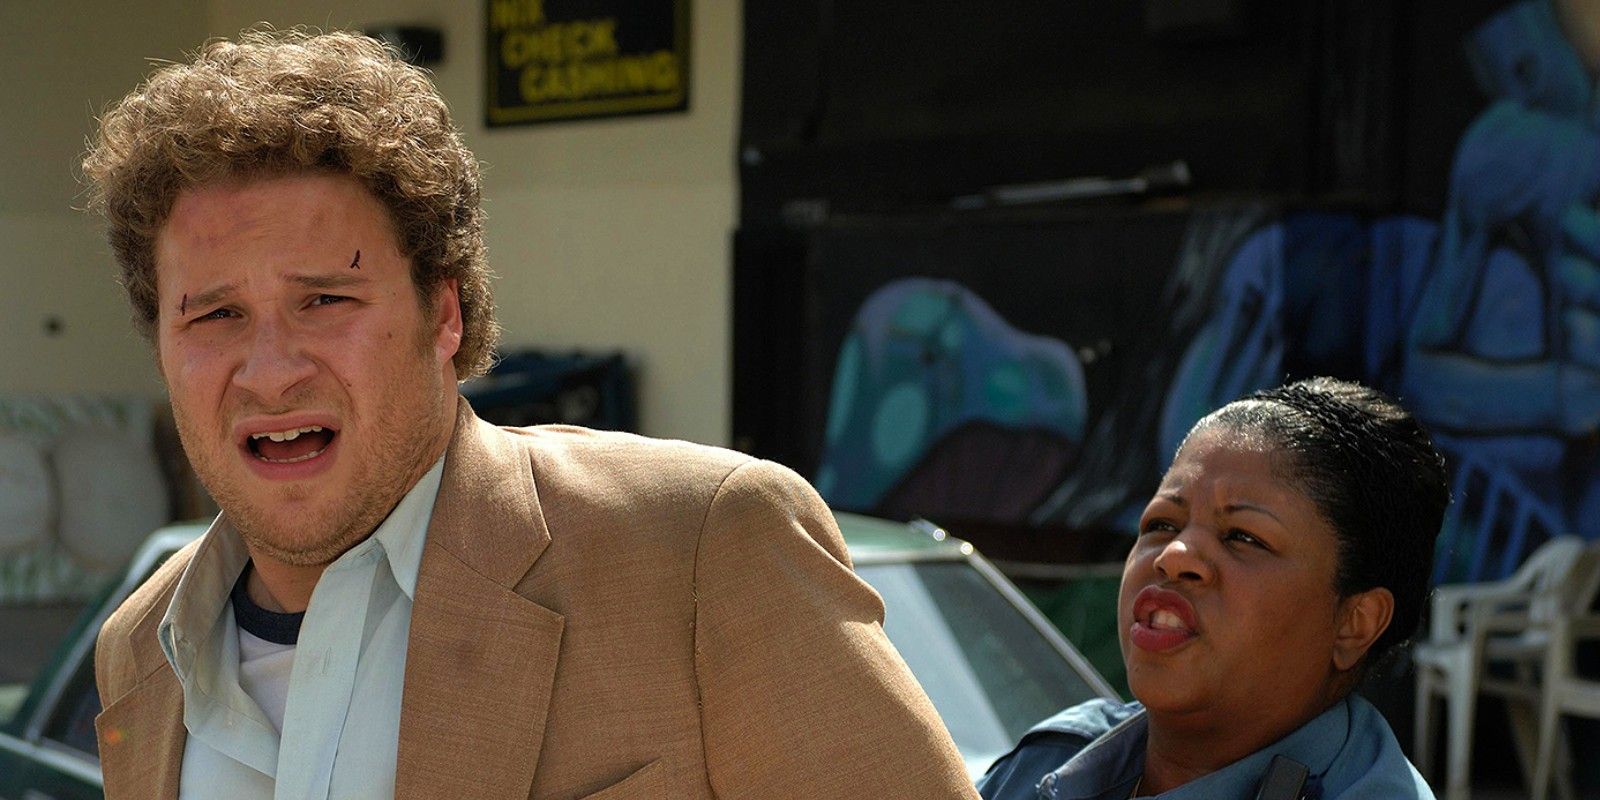 A Cop Once Asked Pineapple Express Star Seth Rogen To Get High